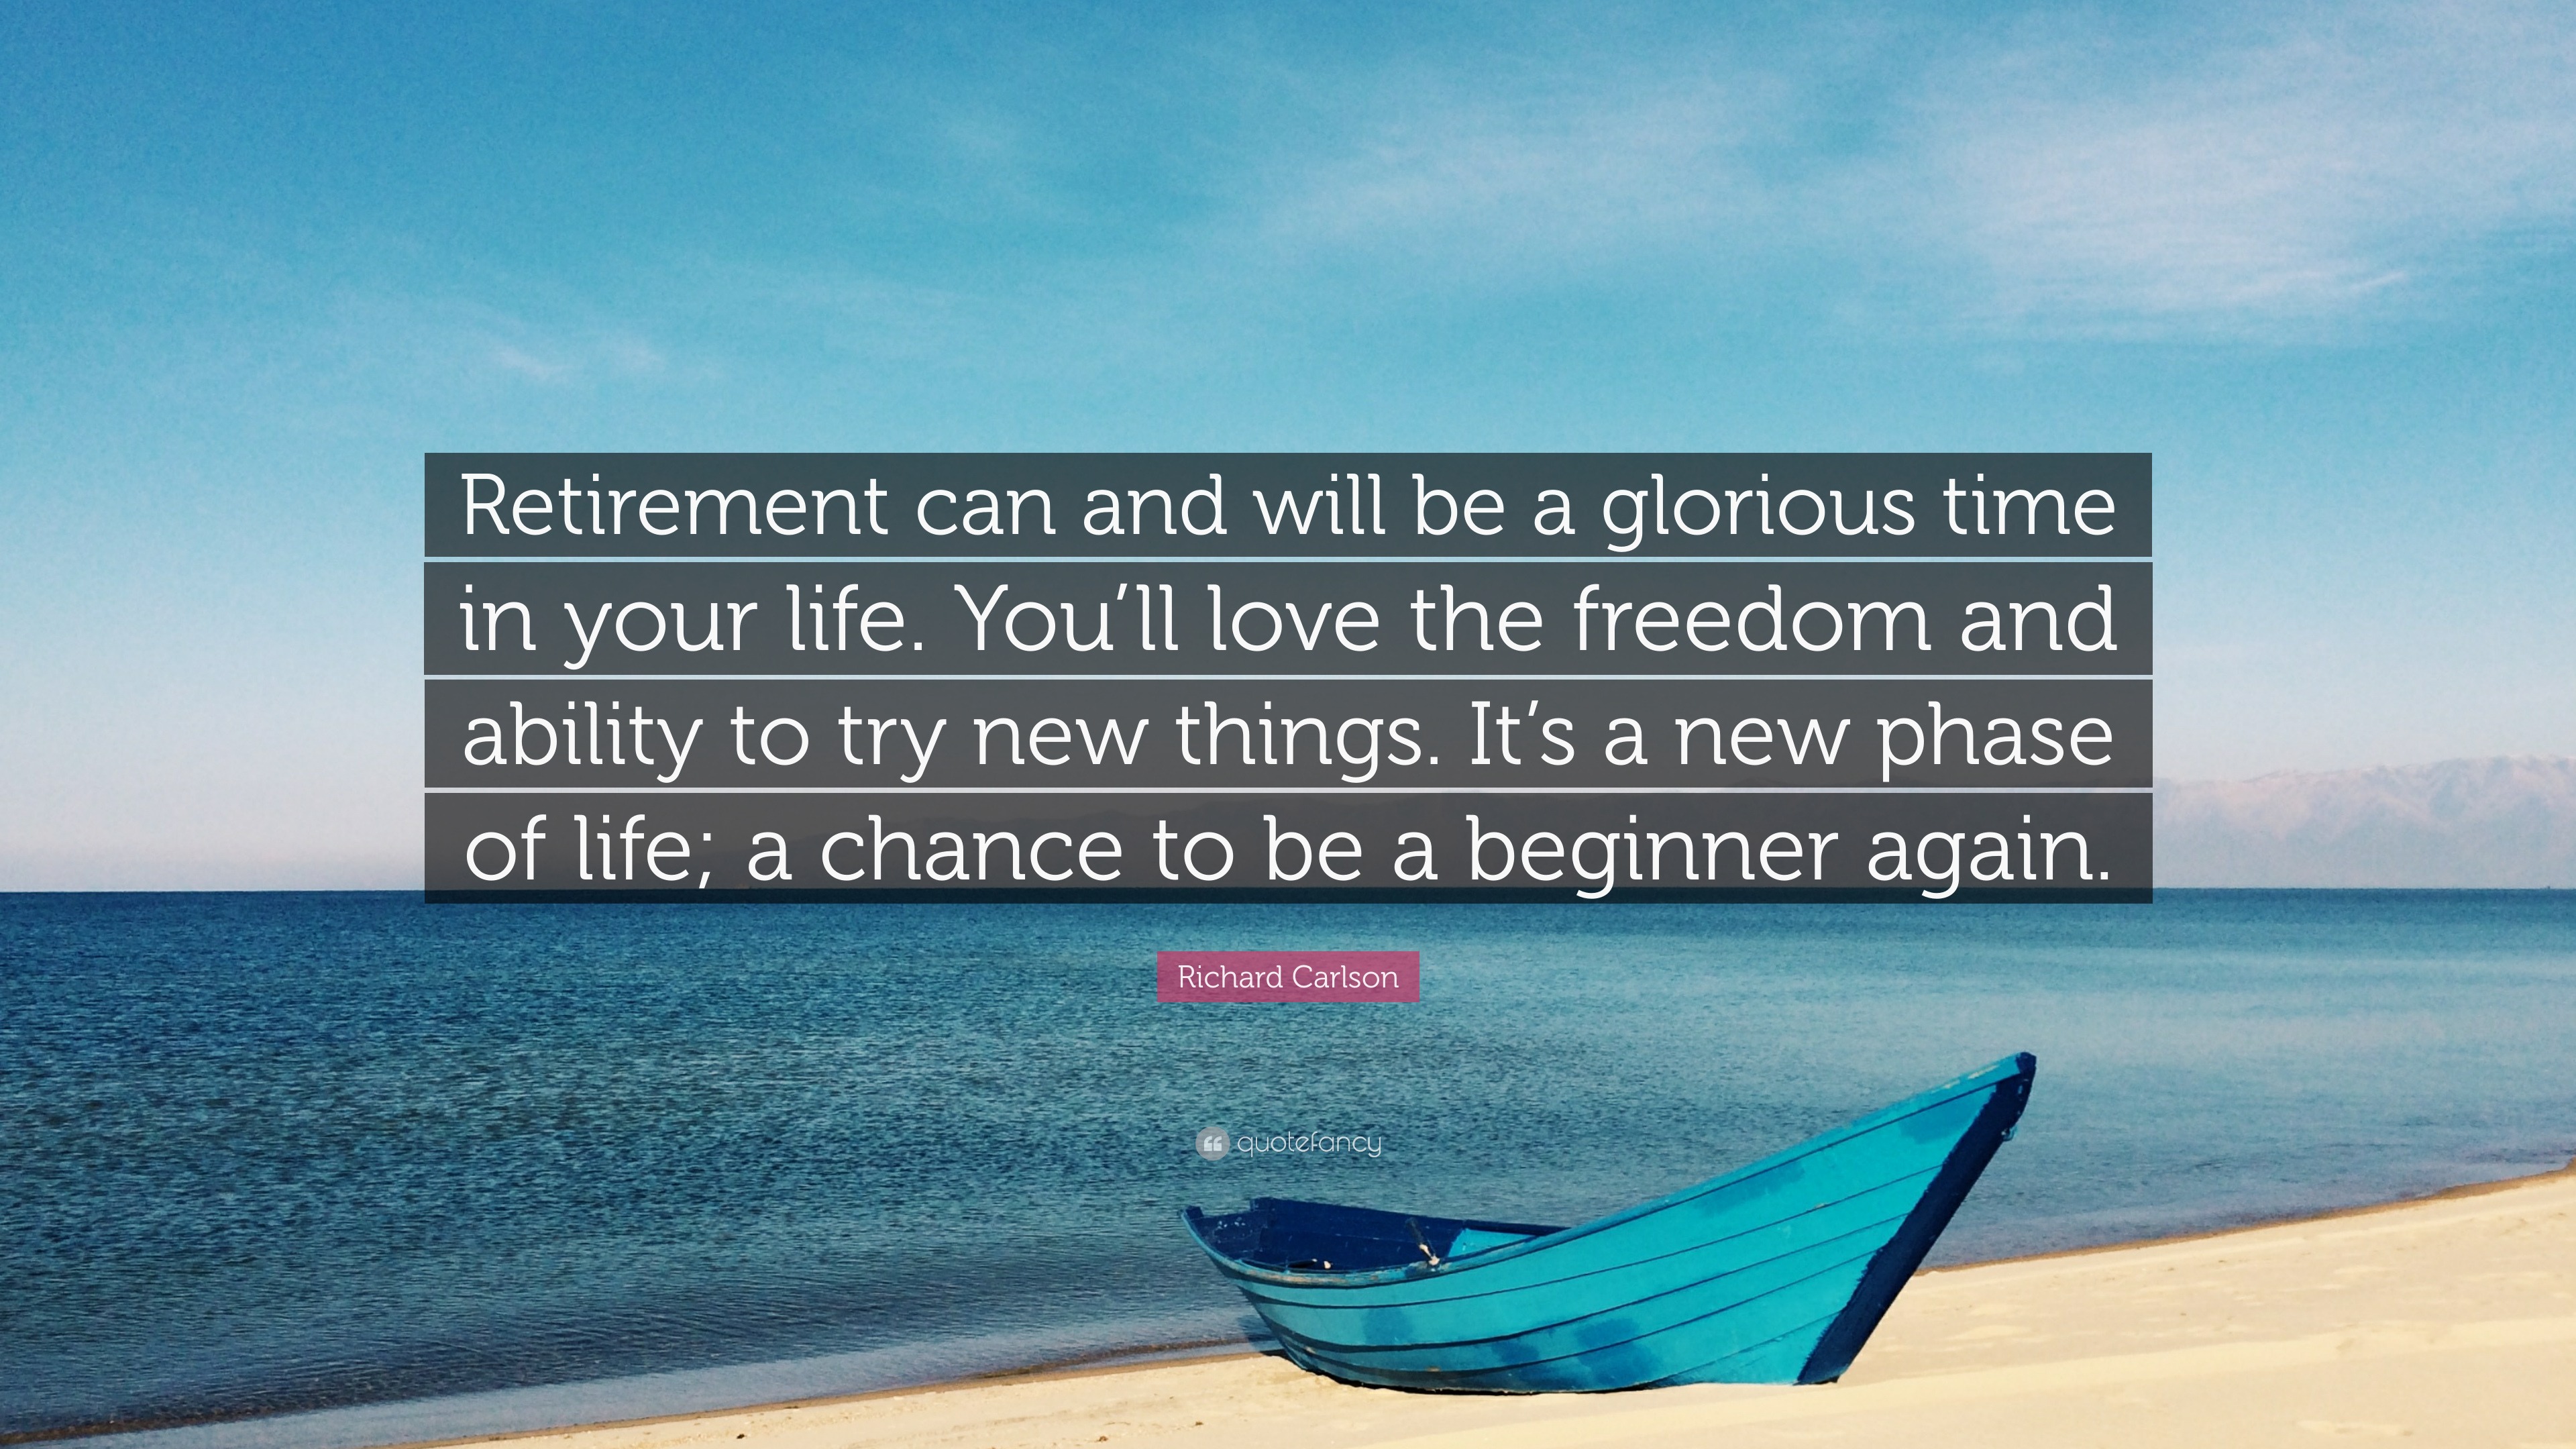 Richard Carlson Quote: “Retirement can and will be a glorious time in ...